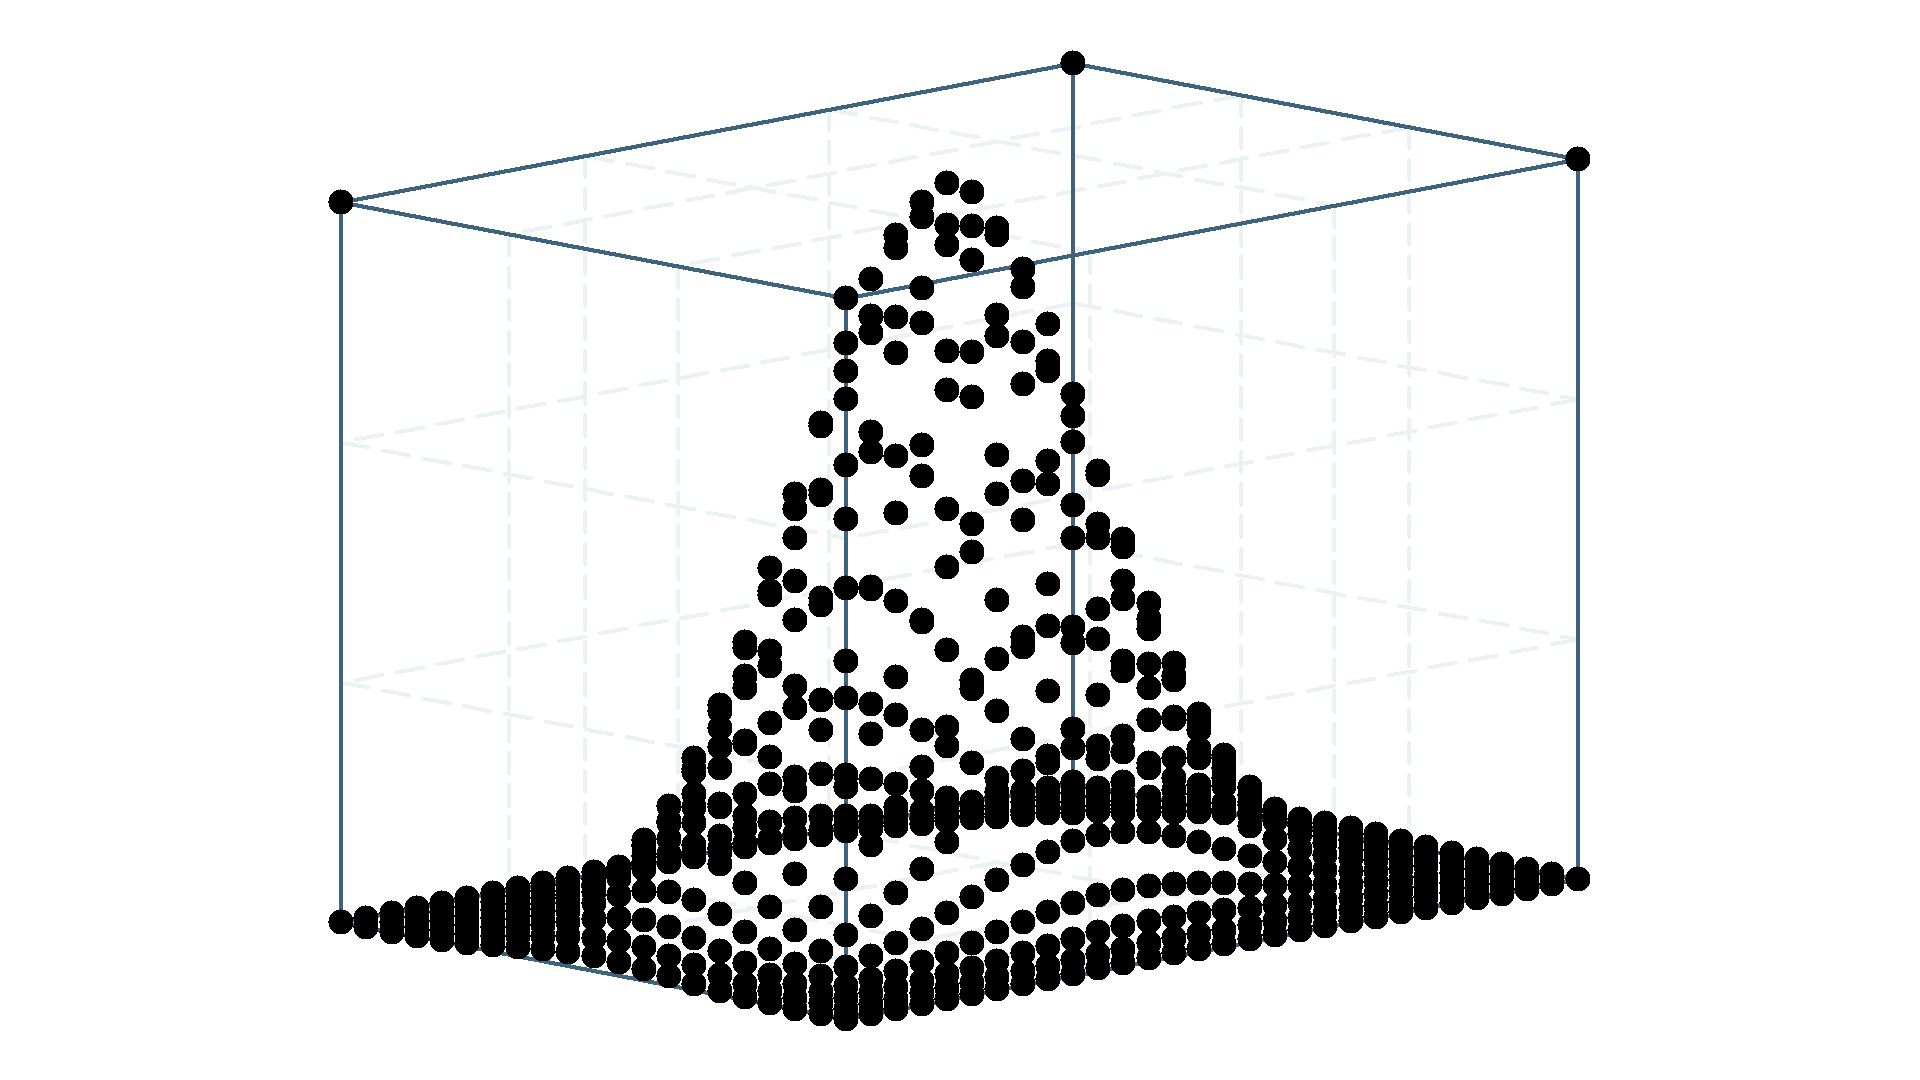 Example 11: Default 3D-Plot with outer and inner grid-cuboids